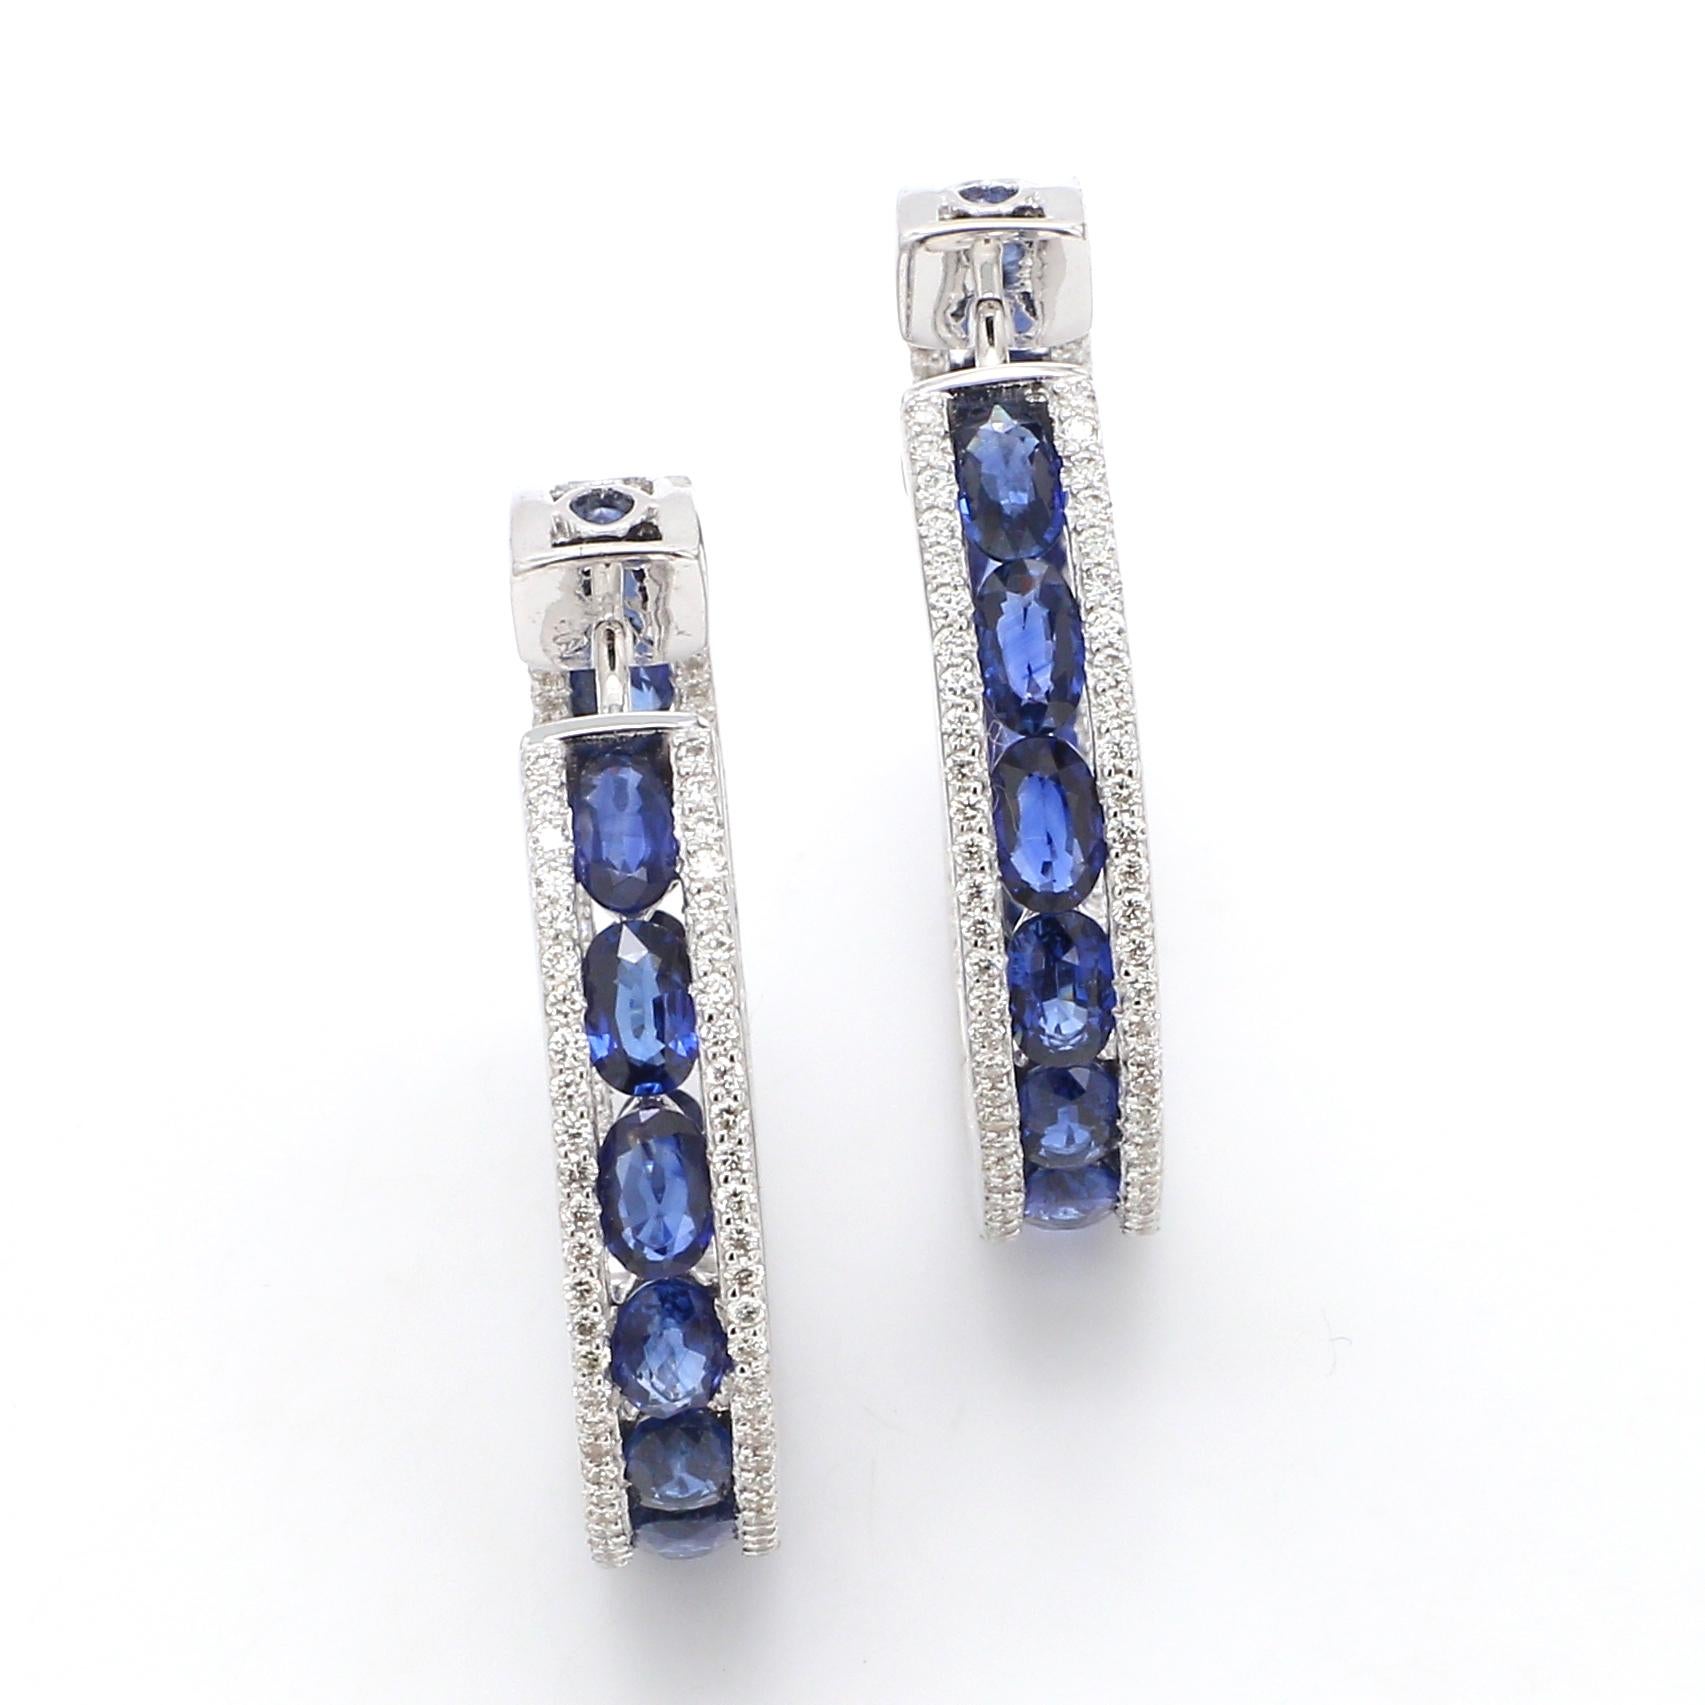 Contemporary 18 Karat White Gold 8.51 Carat Blue Sapphire and Diamond Hoop Earrings For Sale